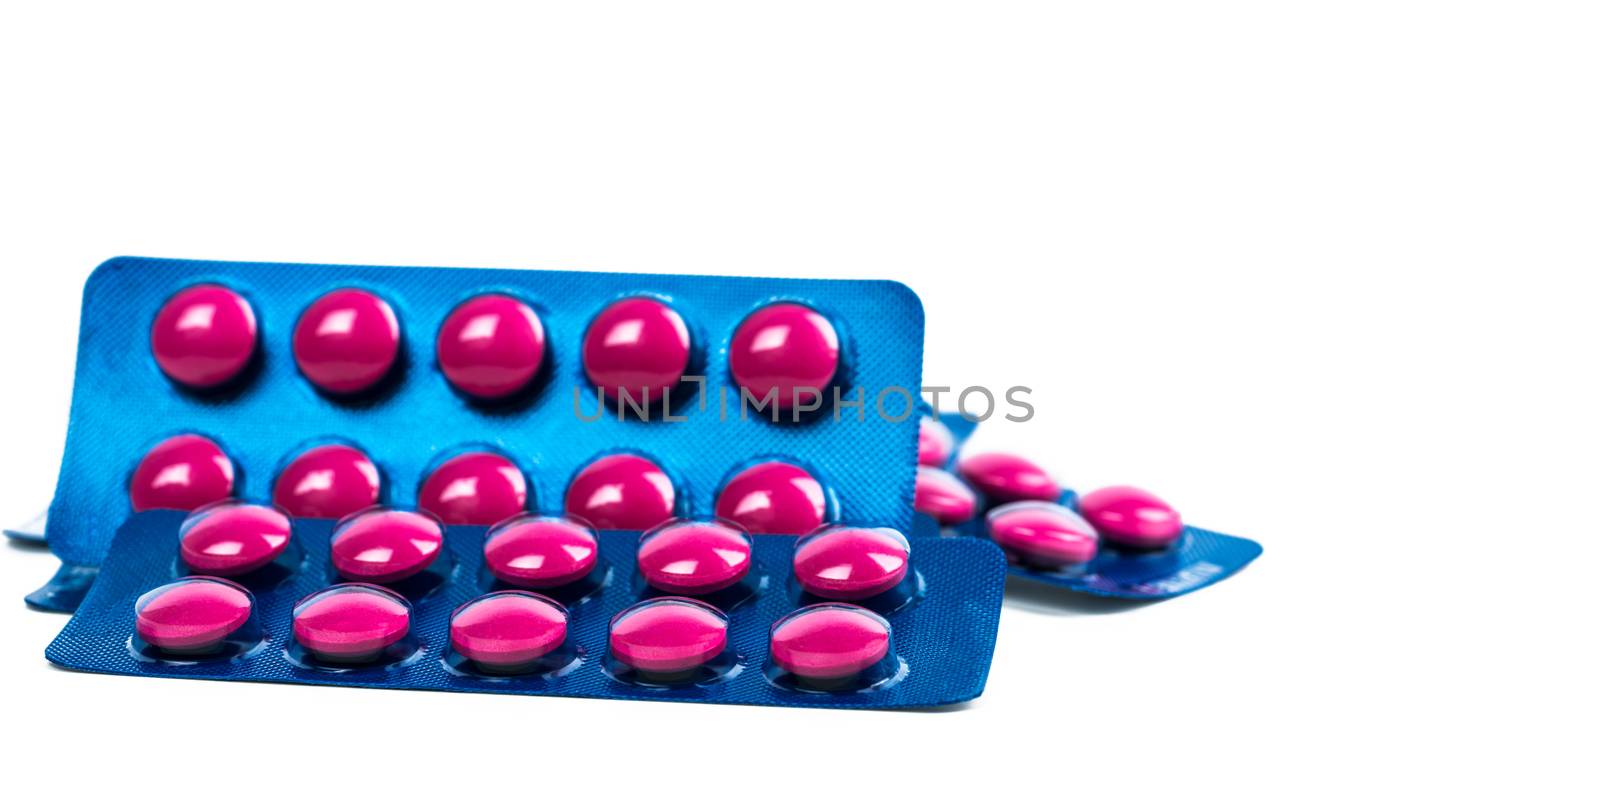 Ibuprofen in pink tablet pills pack in blue blister pack isolated on white background with copy space. Ibuprofen for relief pain, headache, high fever and anti-inflammatory. Painkiller tablets pills. by Fahroni